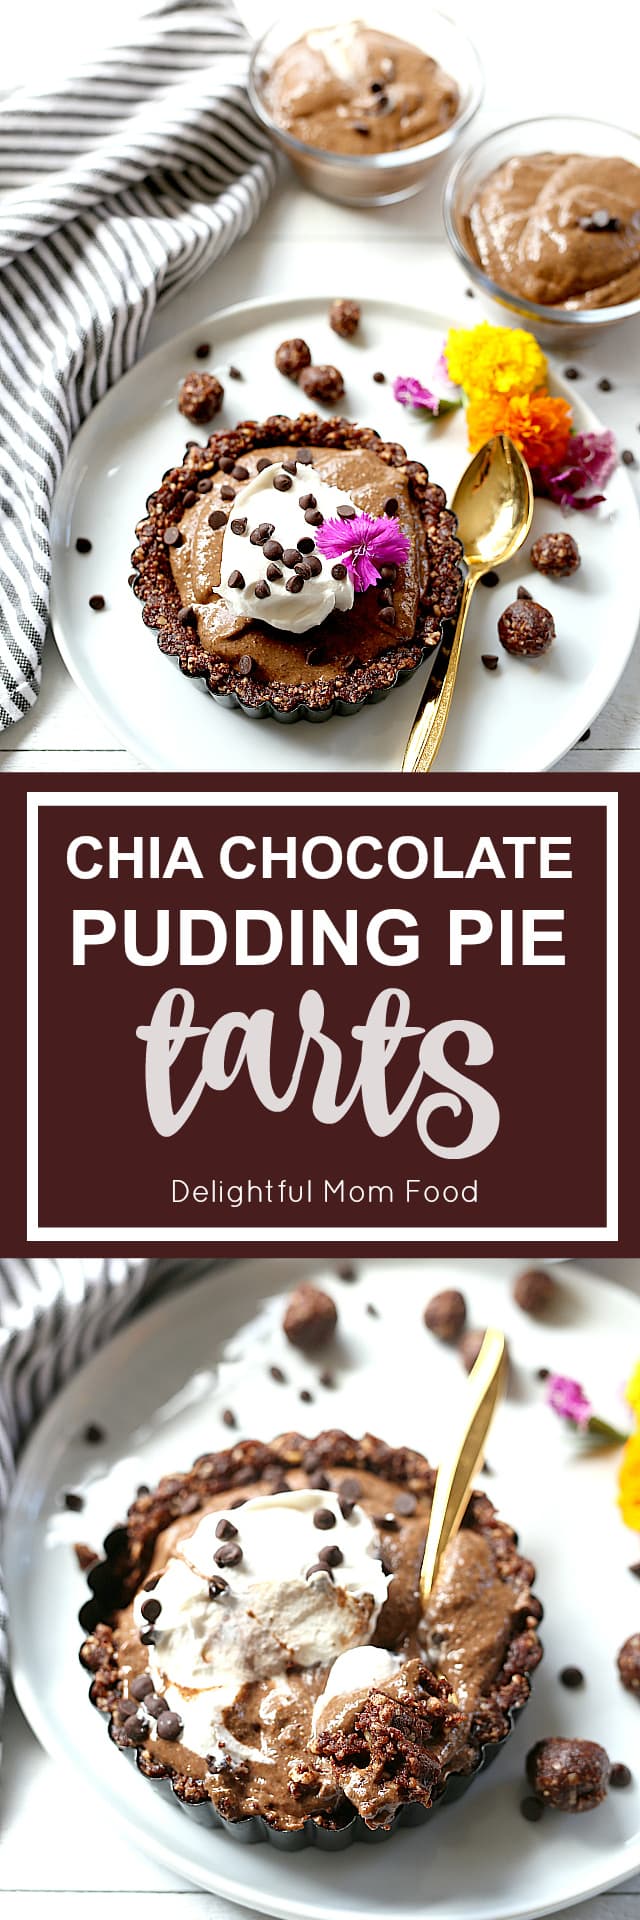 Vegan chocolate pie recipe made with chia seed chocolate pudding served as a large pie or mini tarts! A delicious easy blend of chia seeds, cocoa powder, vanilla flavors and almond milk topped on a healthy no-bake chocolate, nut and date crust!